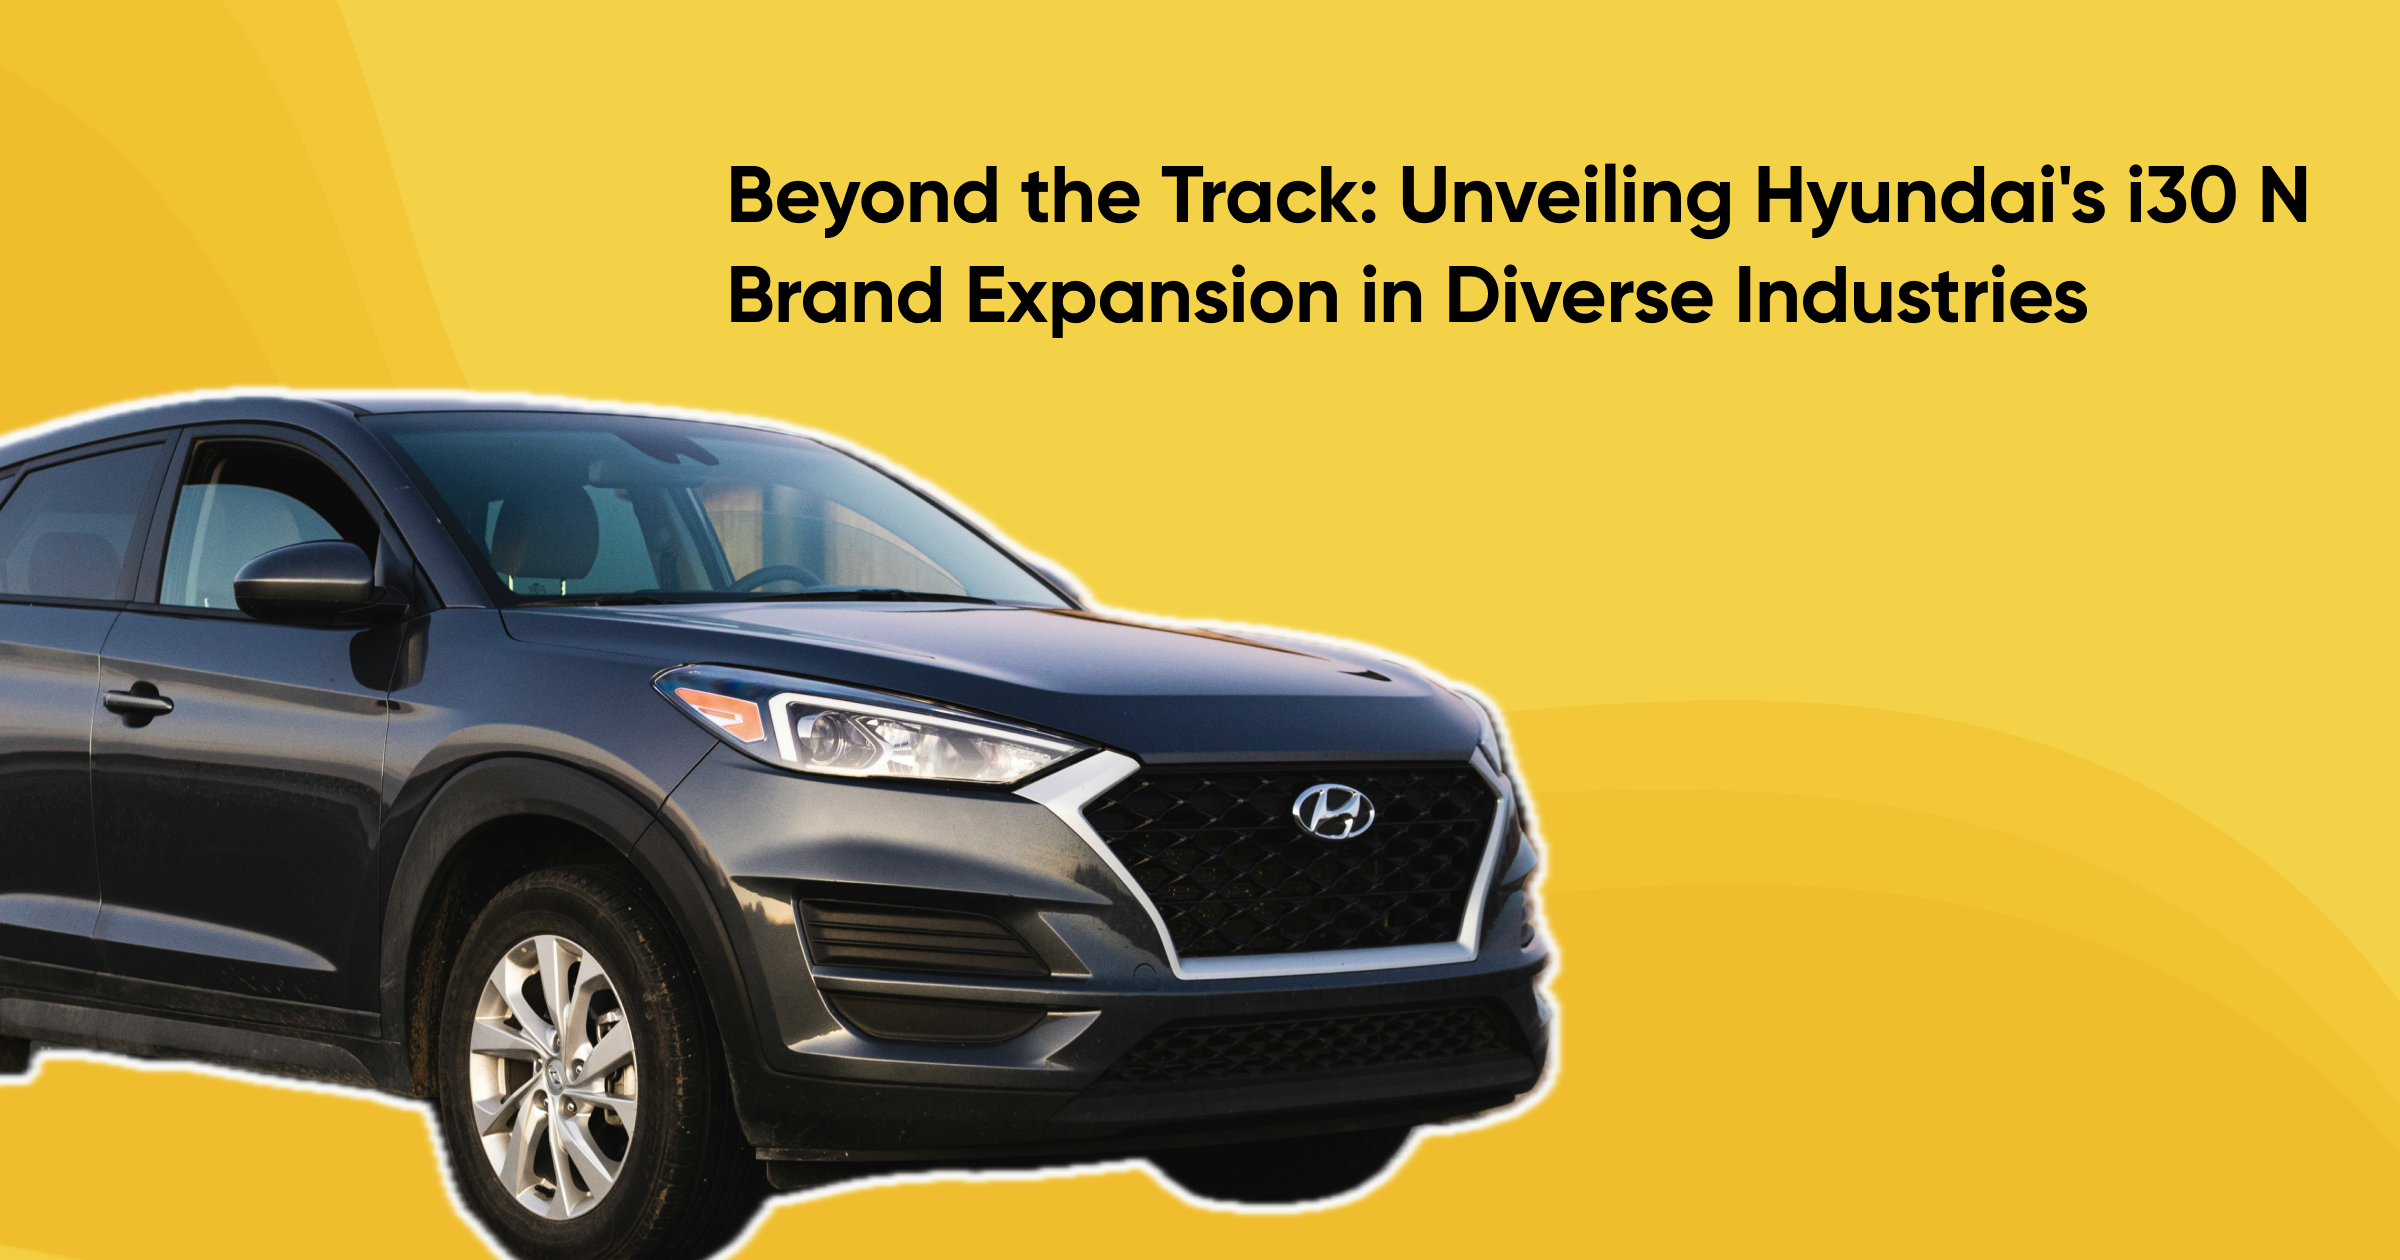 Beyond the Track: Unveiling Hyundai's i30 N Brand Expansion in Diverse Industries